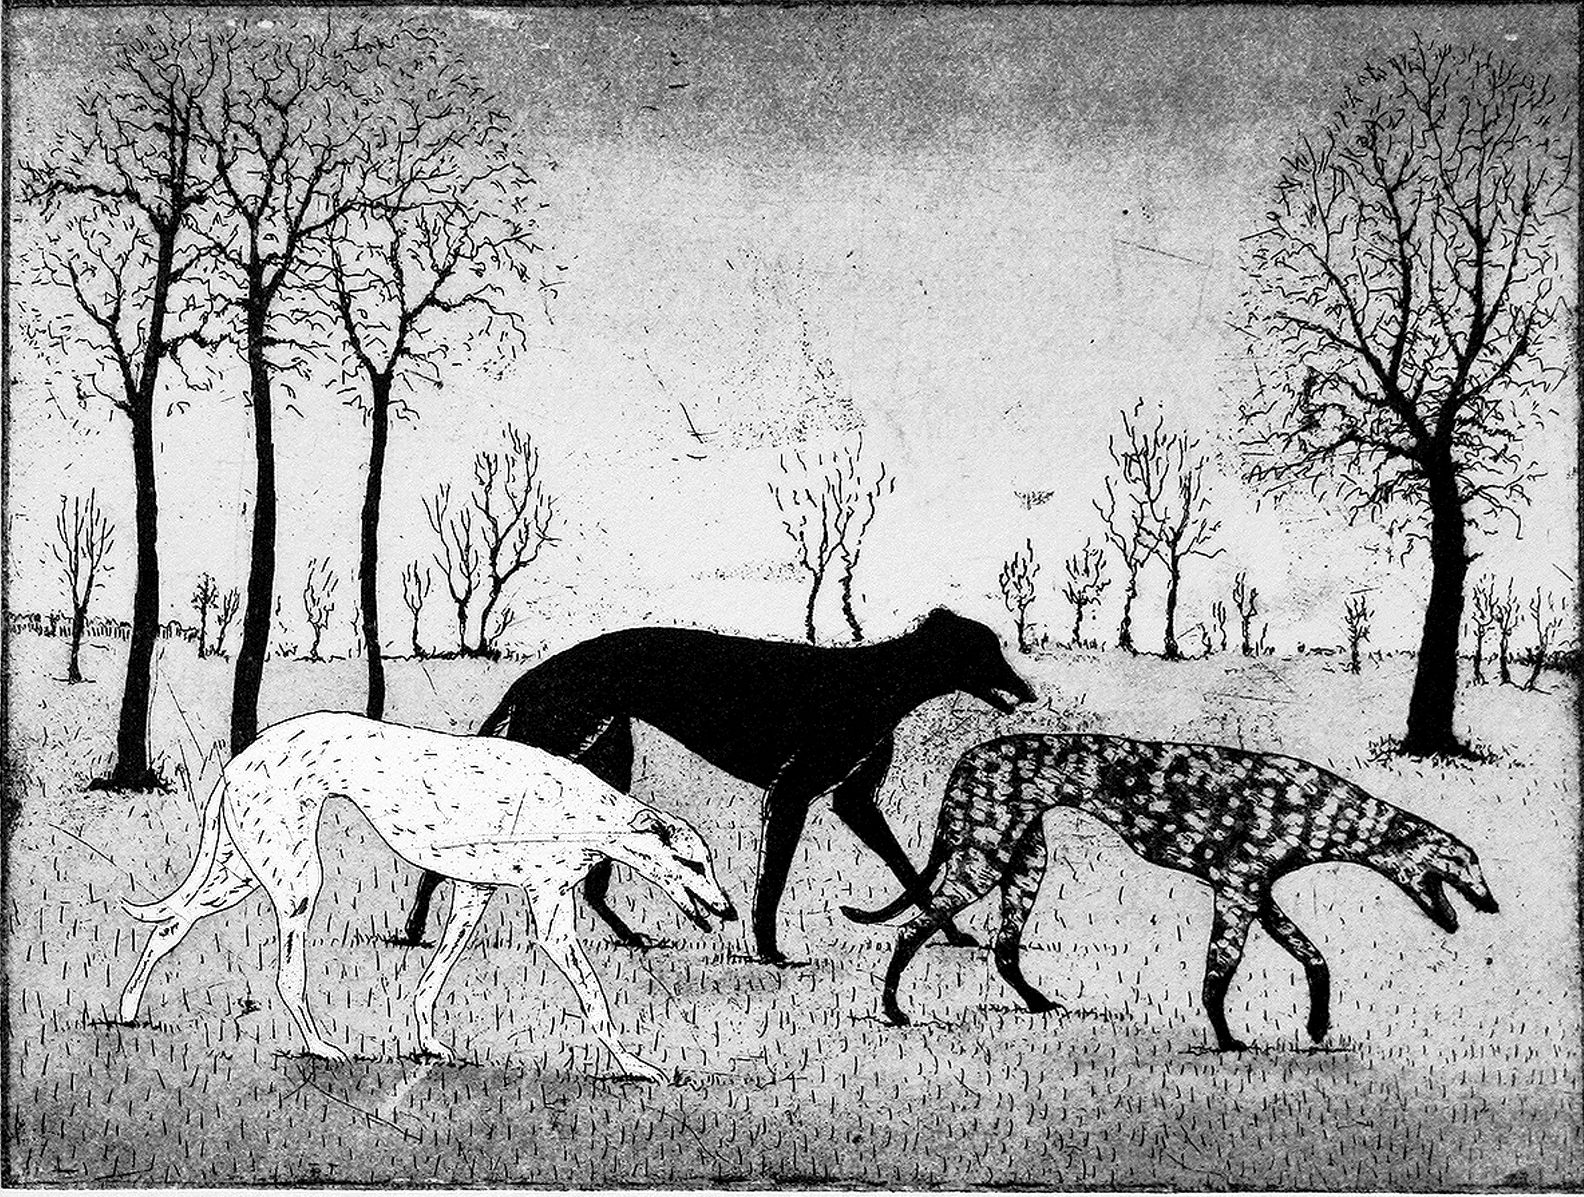 Strolling Hounds by Tim Southall